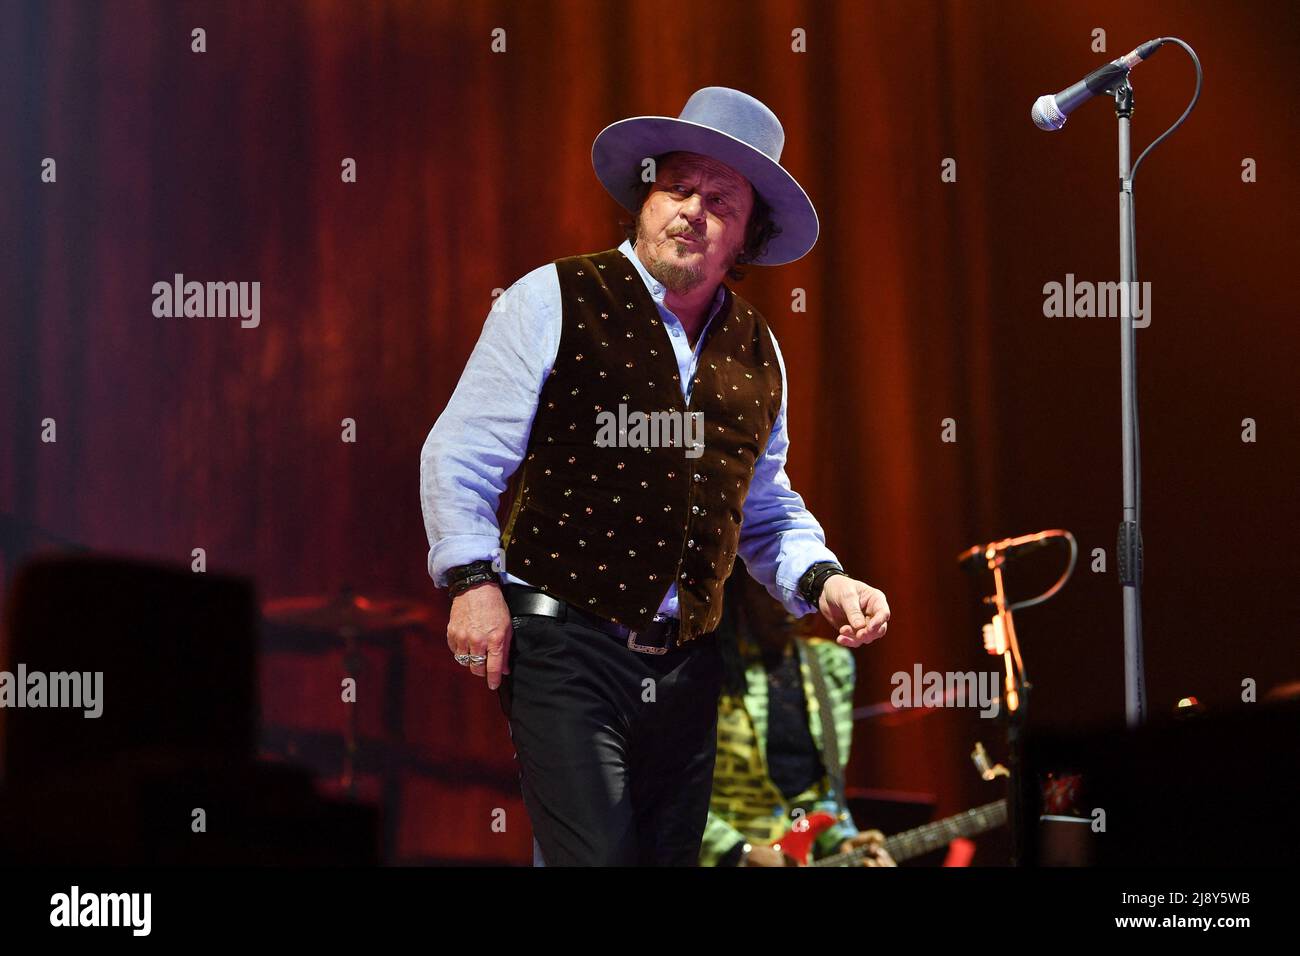 Zucchero Fornaciari performs at the AccorHotels Arena in Paris, France on May 18, 2022. Photo by Christophe Meng/ABACAPRESS.COM Stock Photo